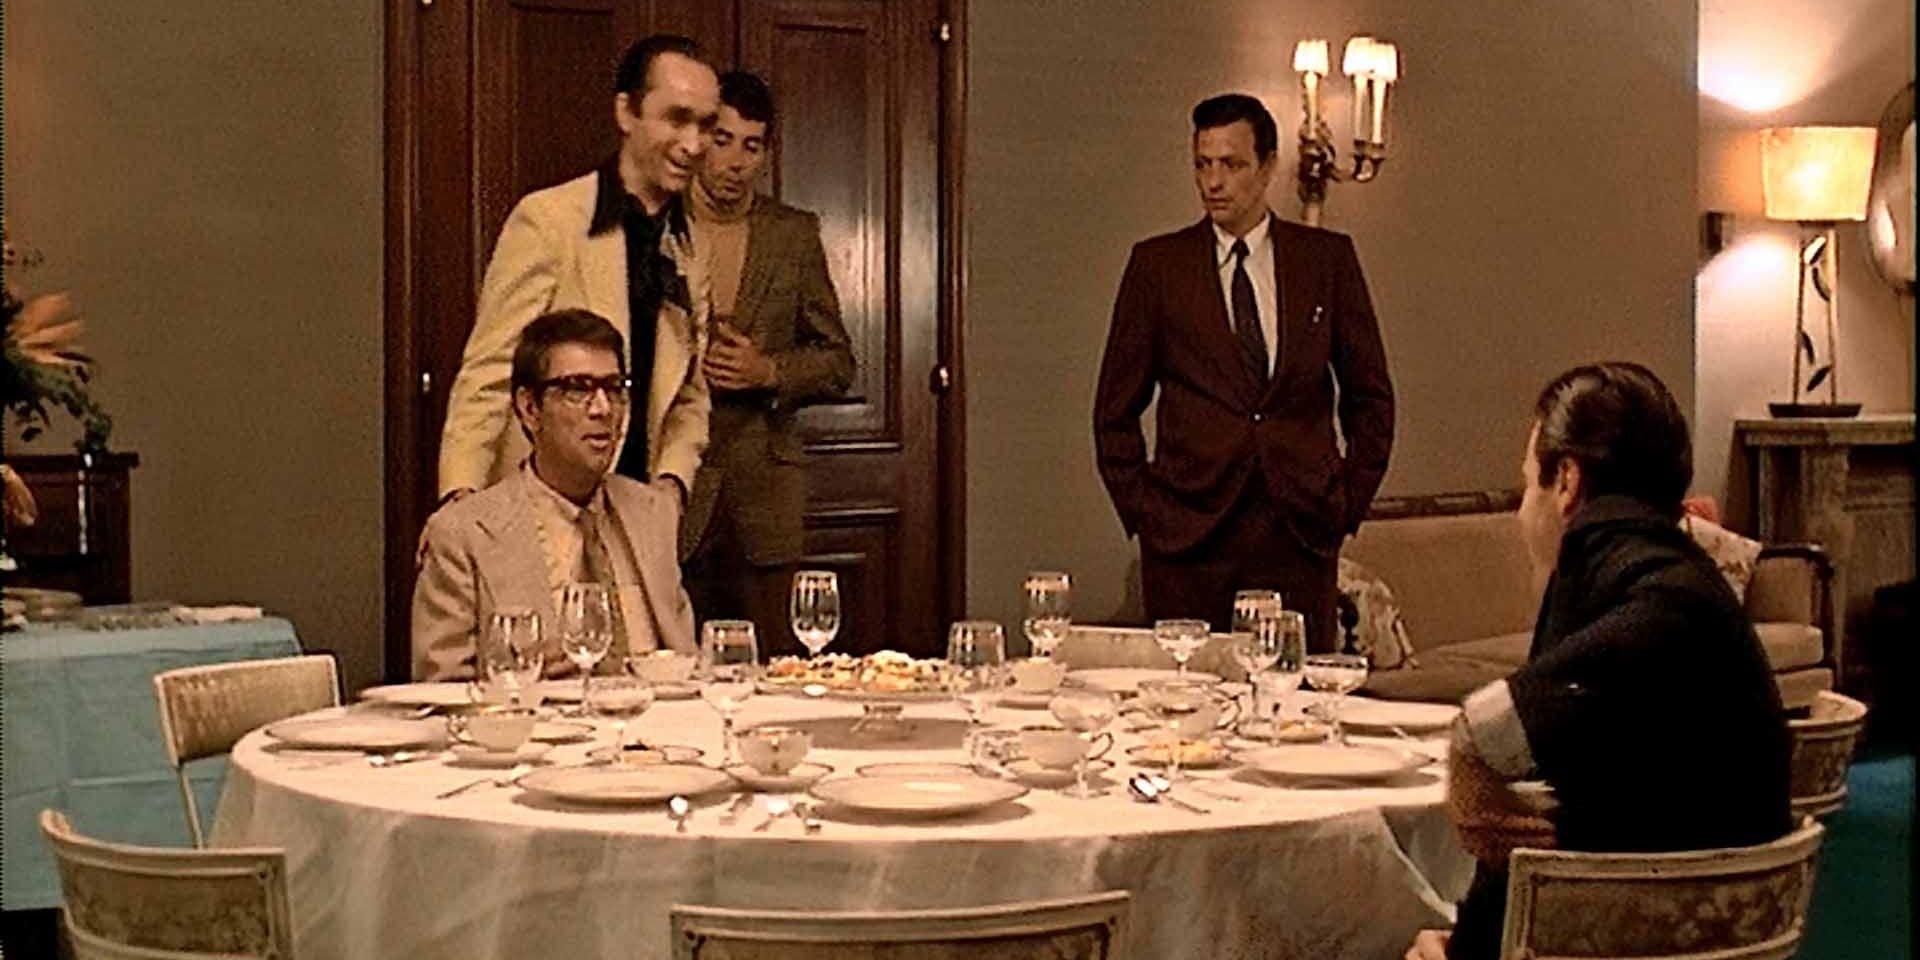 Fredo introduces his brother Michael Corleone to Moe Greene in The Godfather